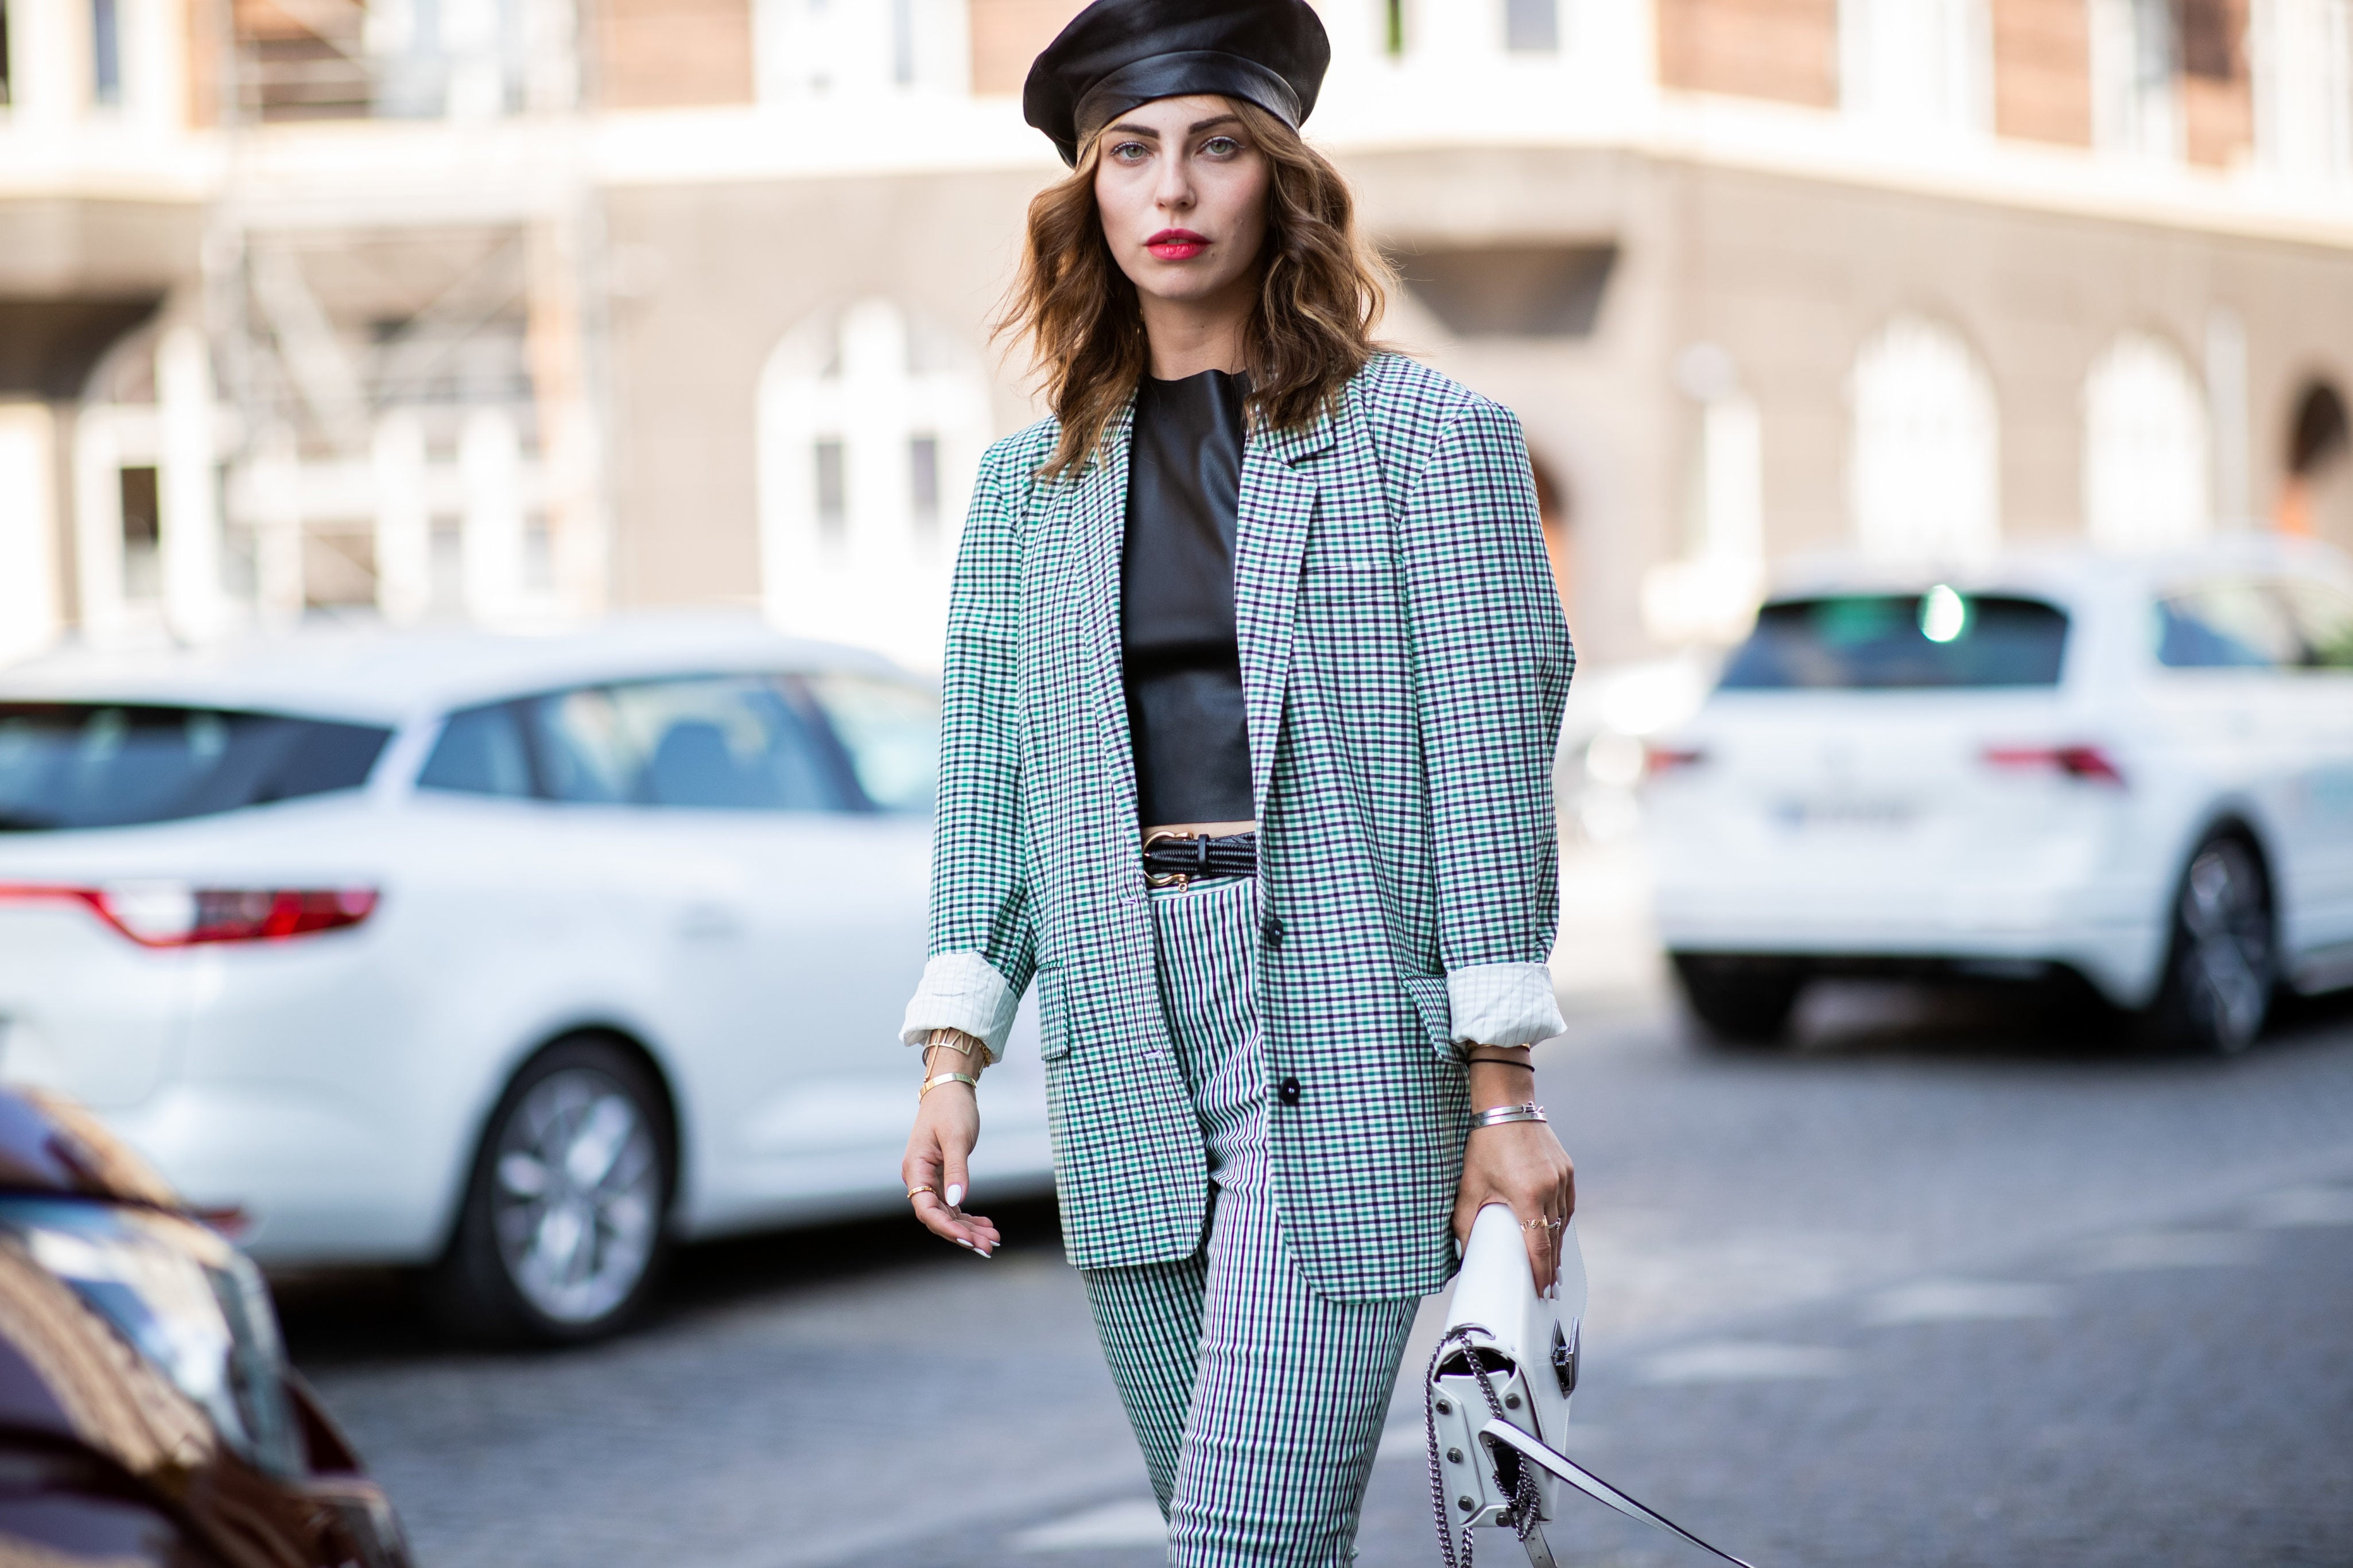 Street Style at Copenhagen Fashion Week Continues to Impress - FASHION ...